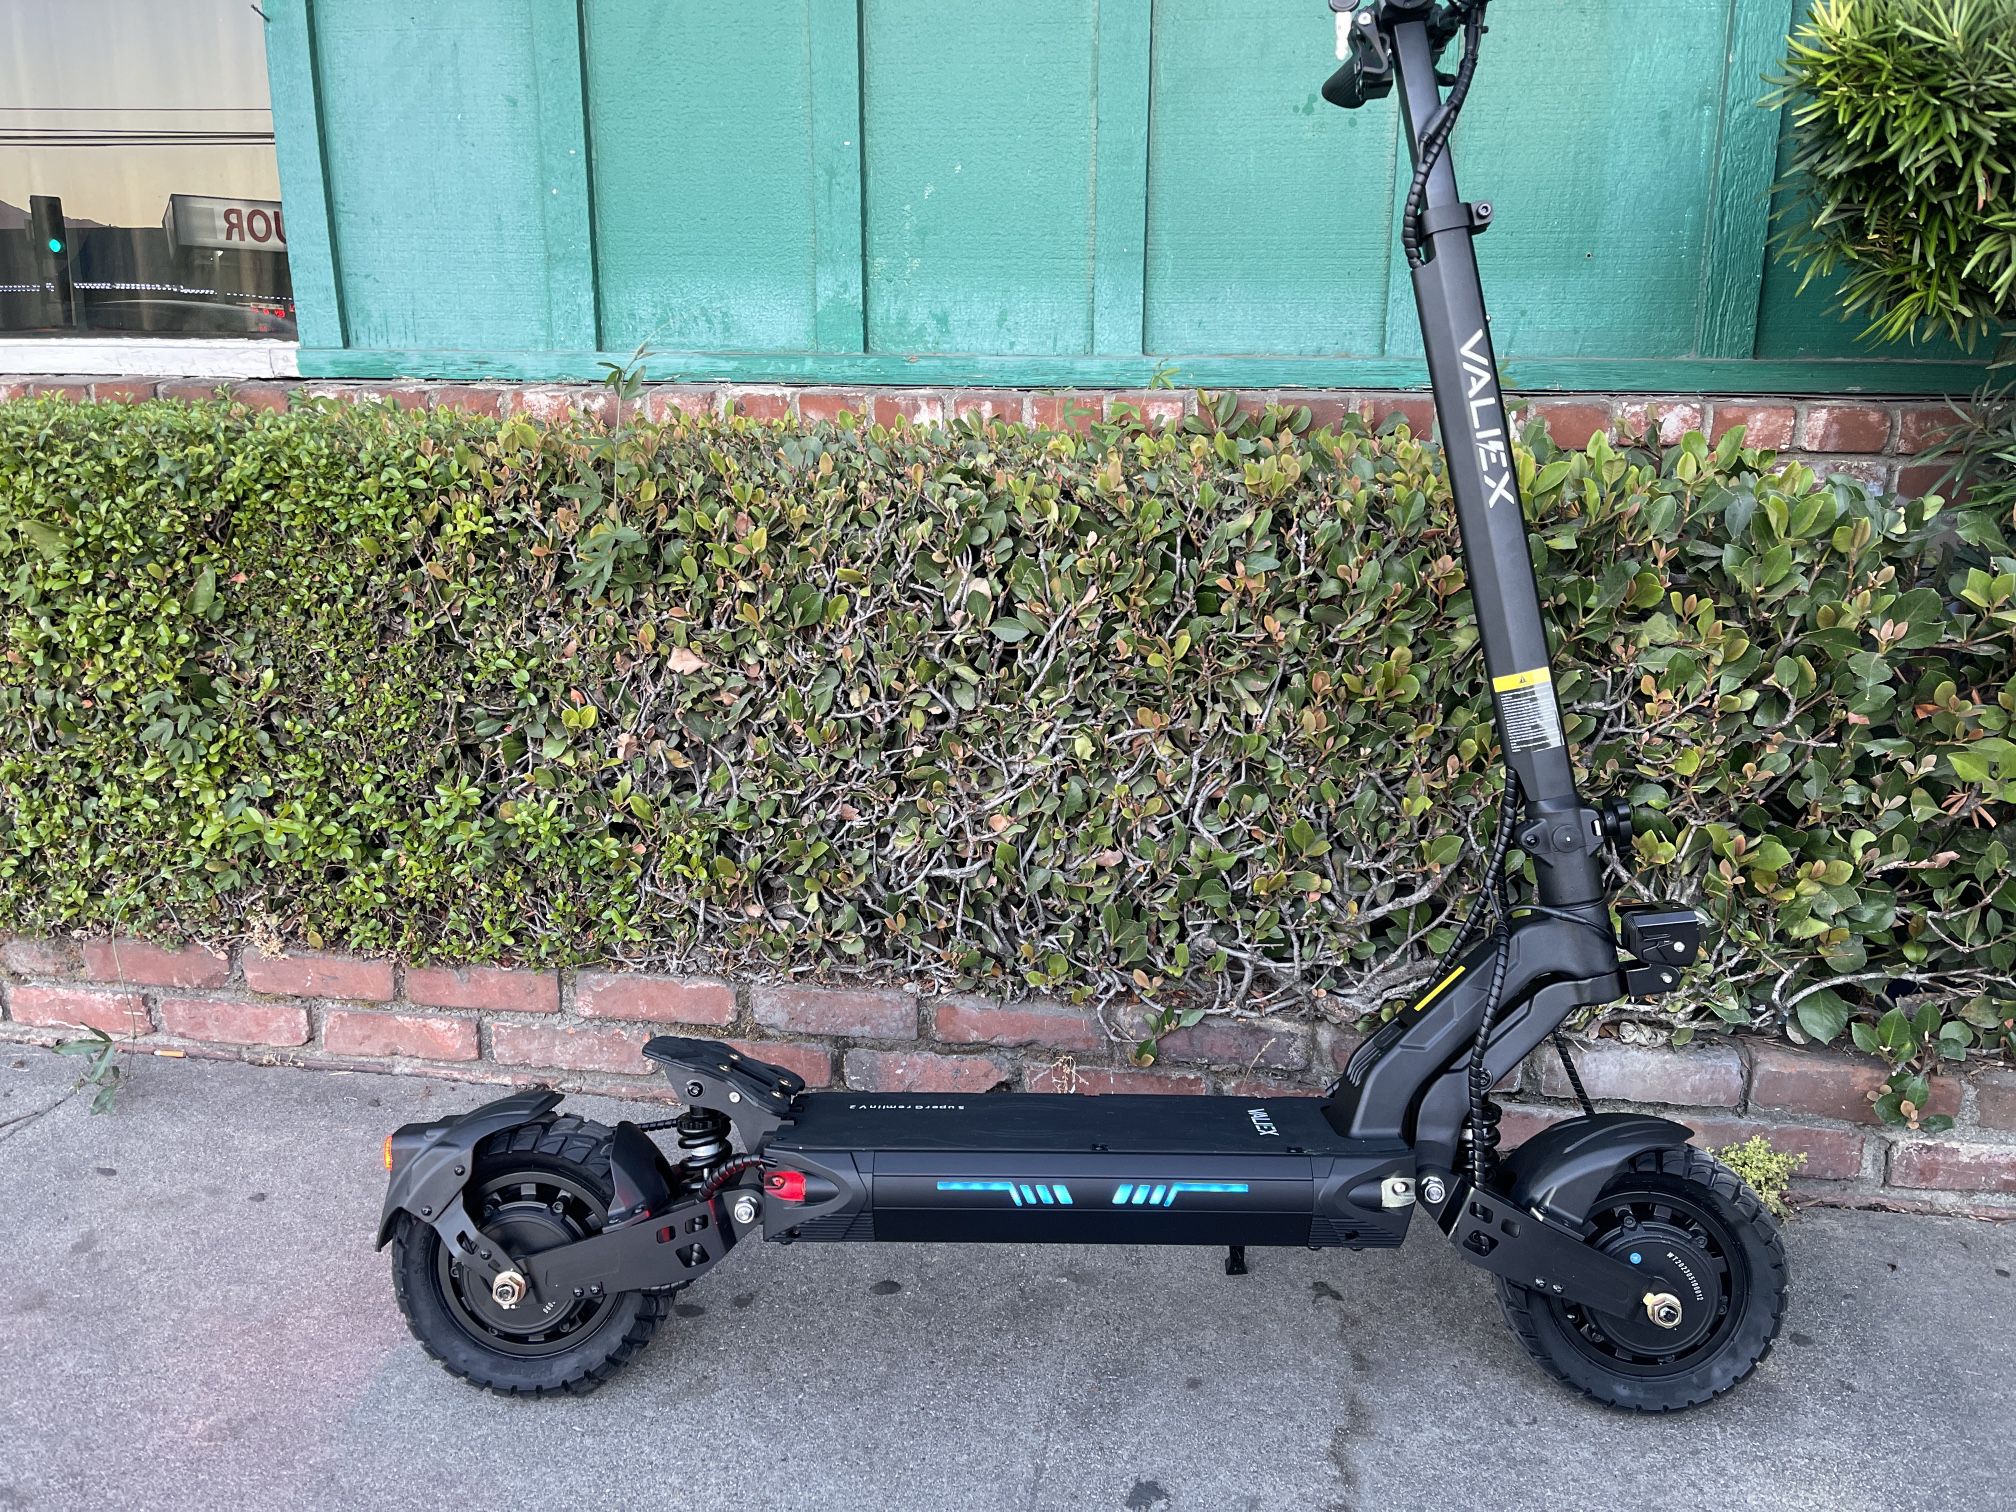 🌹⚡️🛴$50 Down No Credit On Super Fast Dual Motor Electric E Scooter 🙏💸🇺🇸